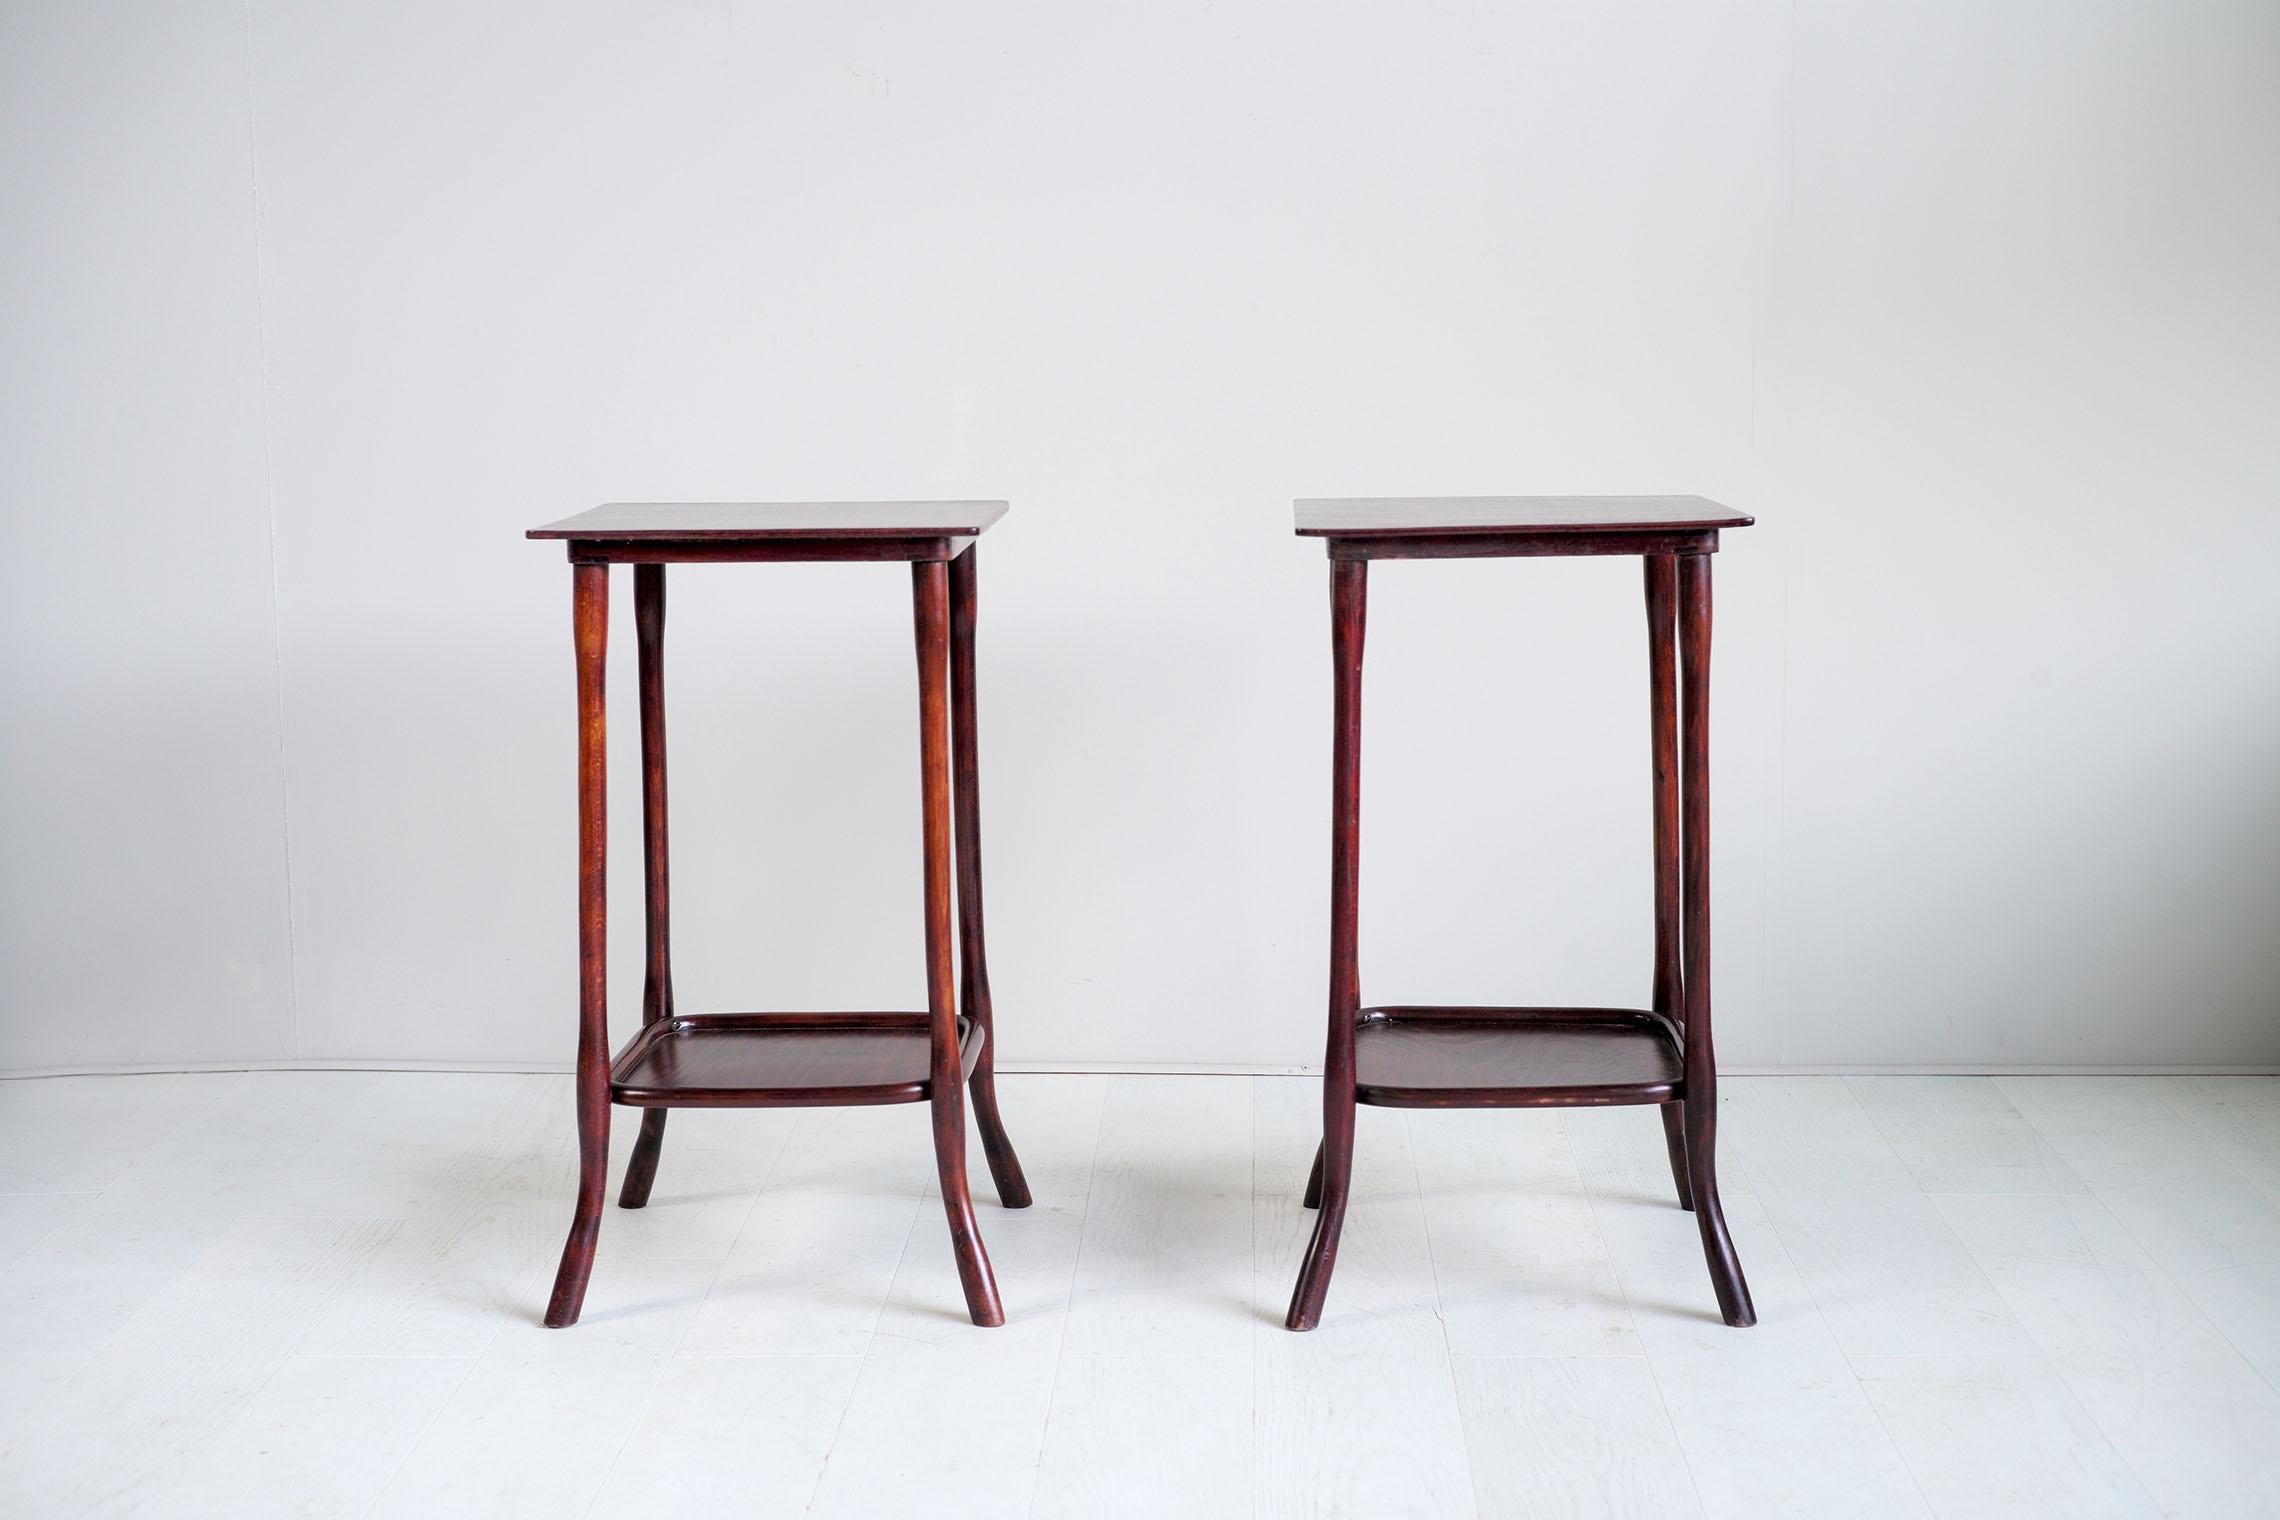 Rare pair of curved wooden tables called Servants of Michael Thonet, published under the reference number 9136 of Thonet brothers, Vienna, 1910.
American mahogany finish, signed with the Thonet Wien label.